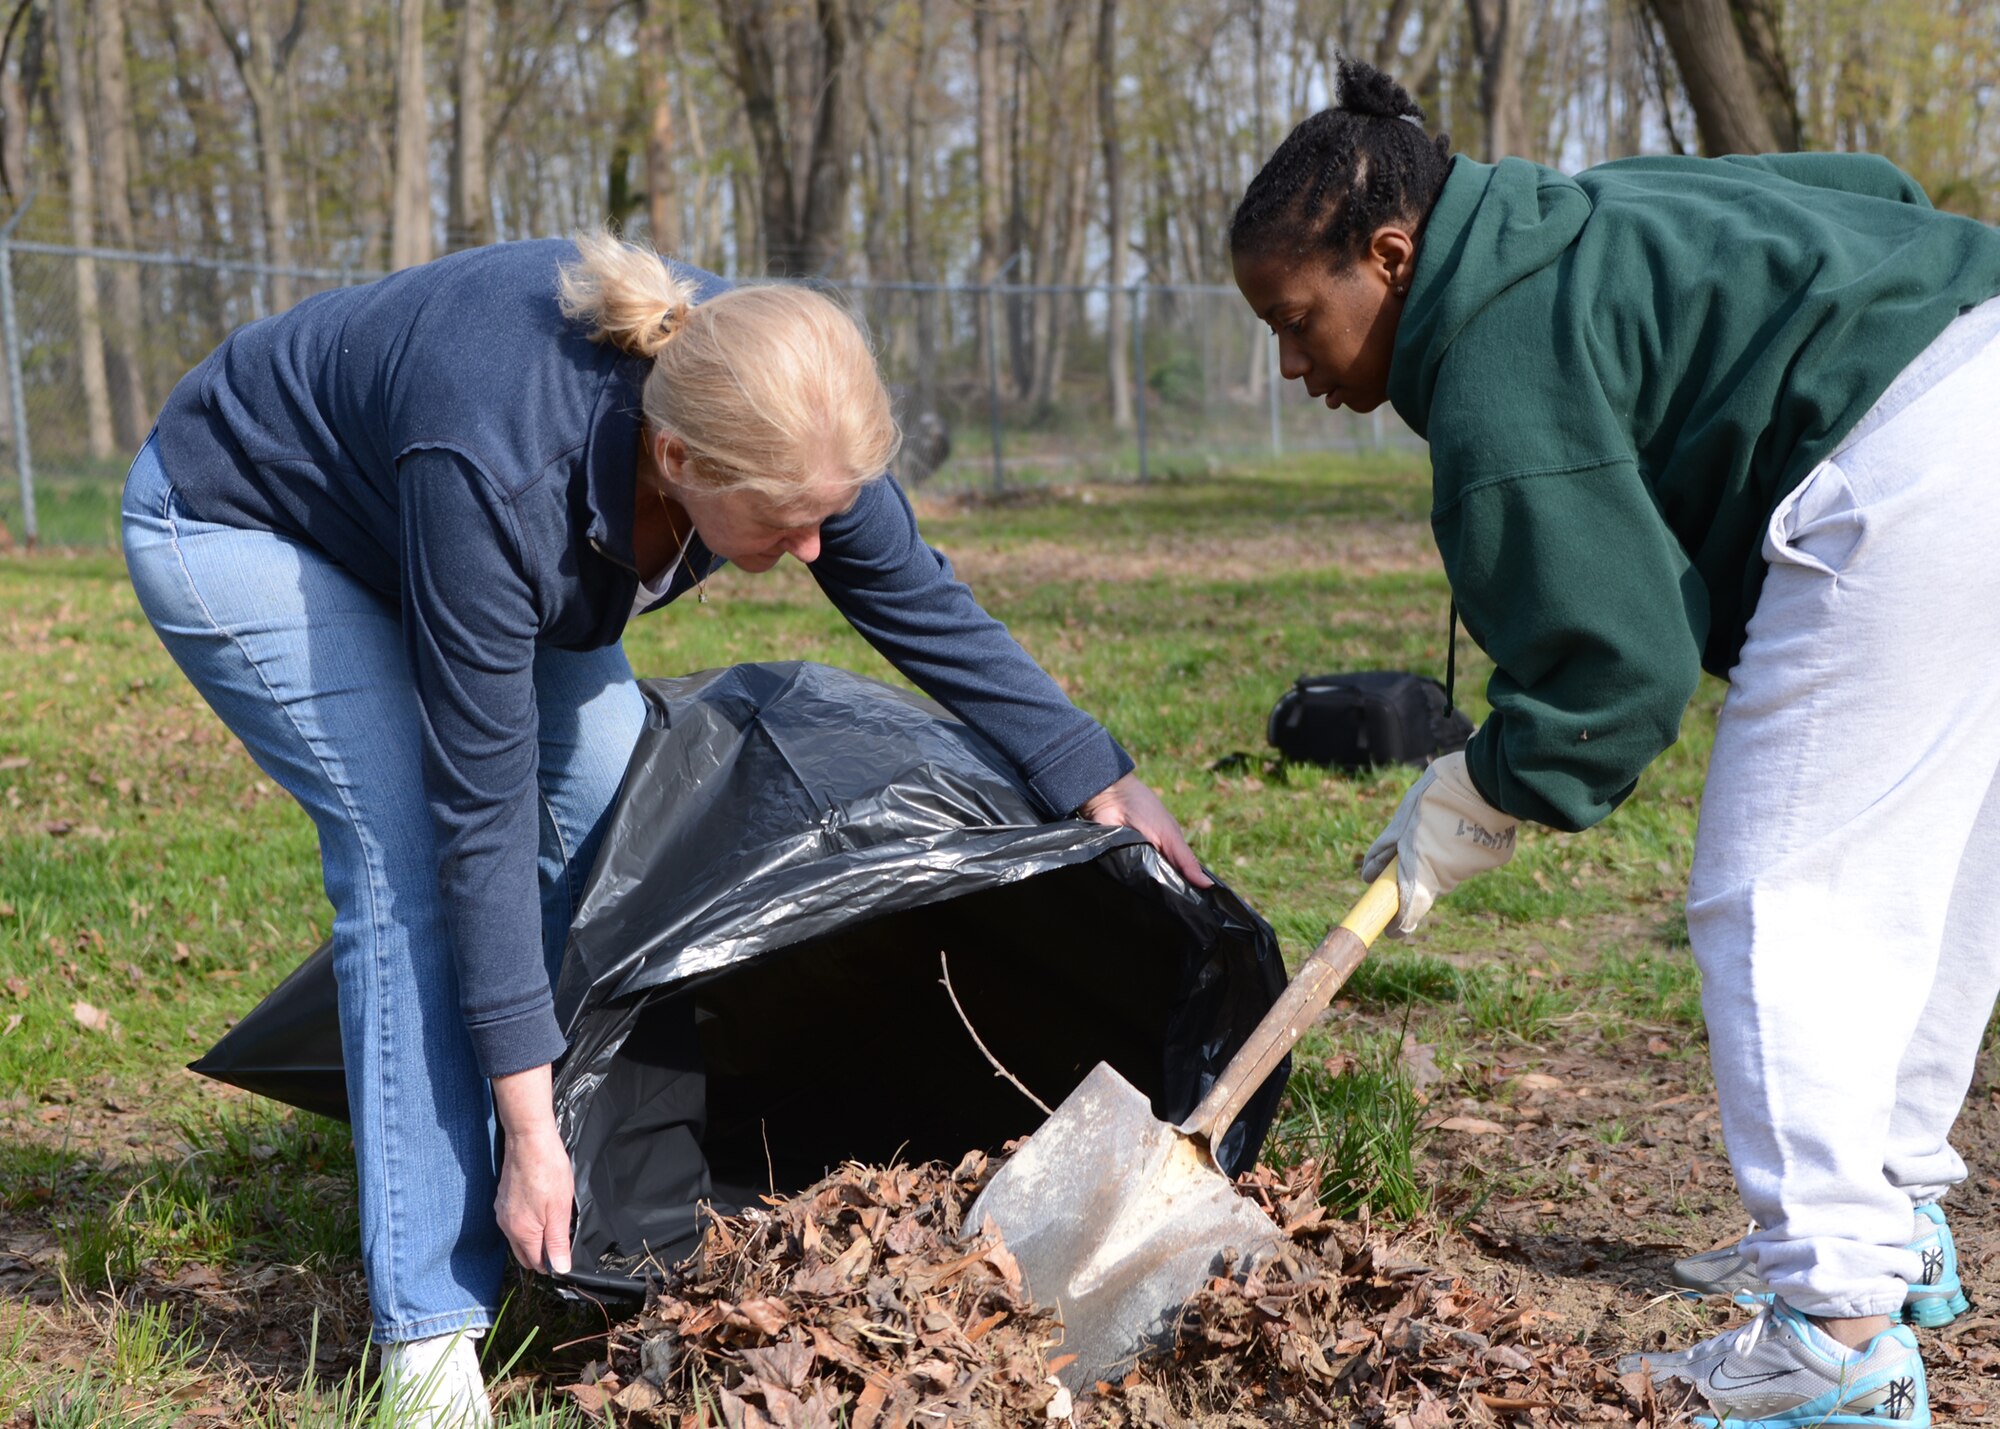 Debbie Willders (left), 175th Comptroller Flight, and U.S. Air Force Tech. Sgt. Alonda Foster, 175th Comptroller Flight, bag up leaves April 25, 2014 during Base Beautification Day at Warfield Air National Guard Base, Baltimore, Md. Base Beautification Day gives members of the 175th Wing the opportunity to improve the cleanliness and aesthetics of their outside work areas.  (U.S. Air National Guard photo by Tech. Sgt. Chris Schepers/RELEASED)